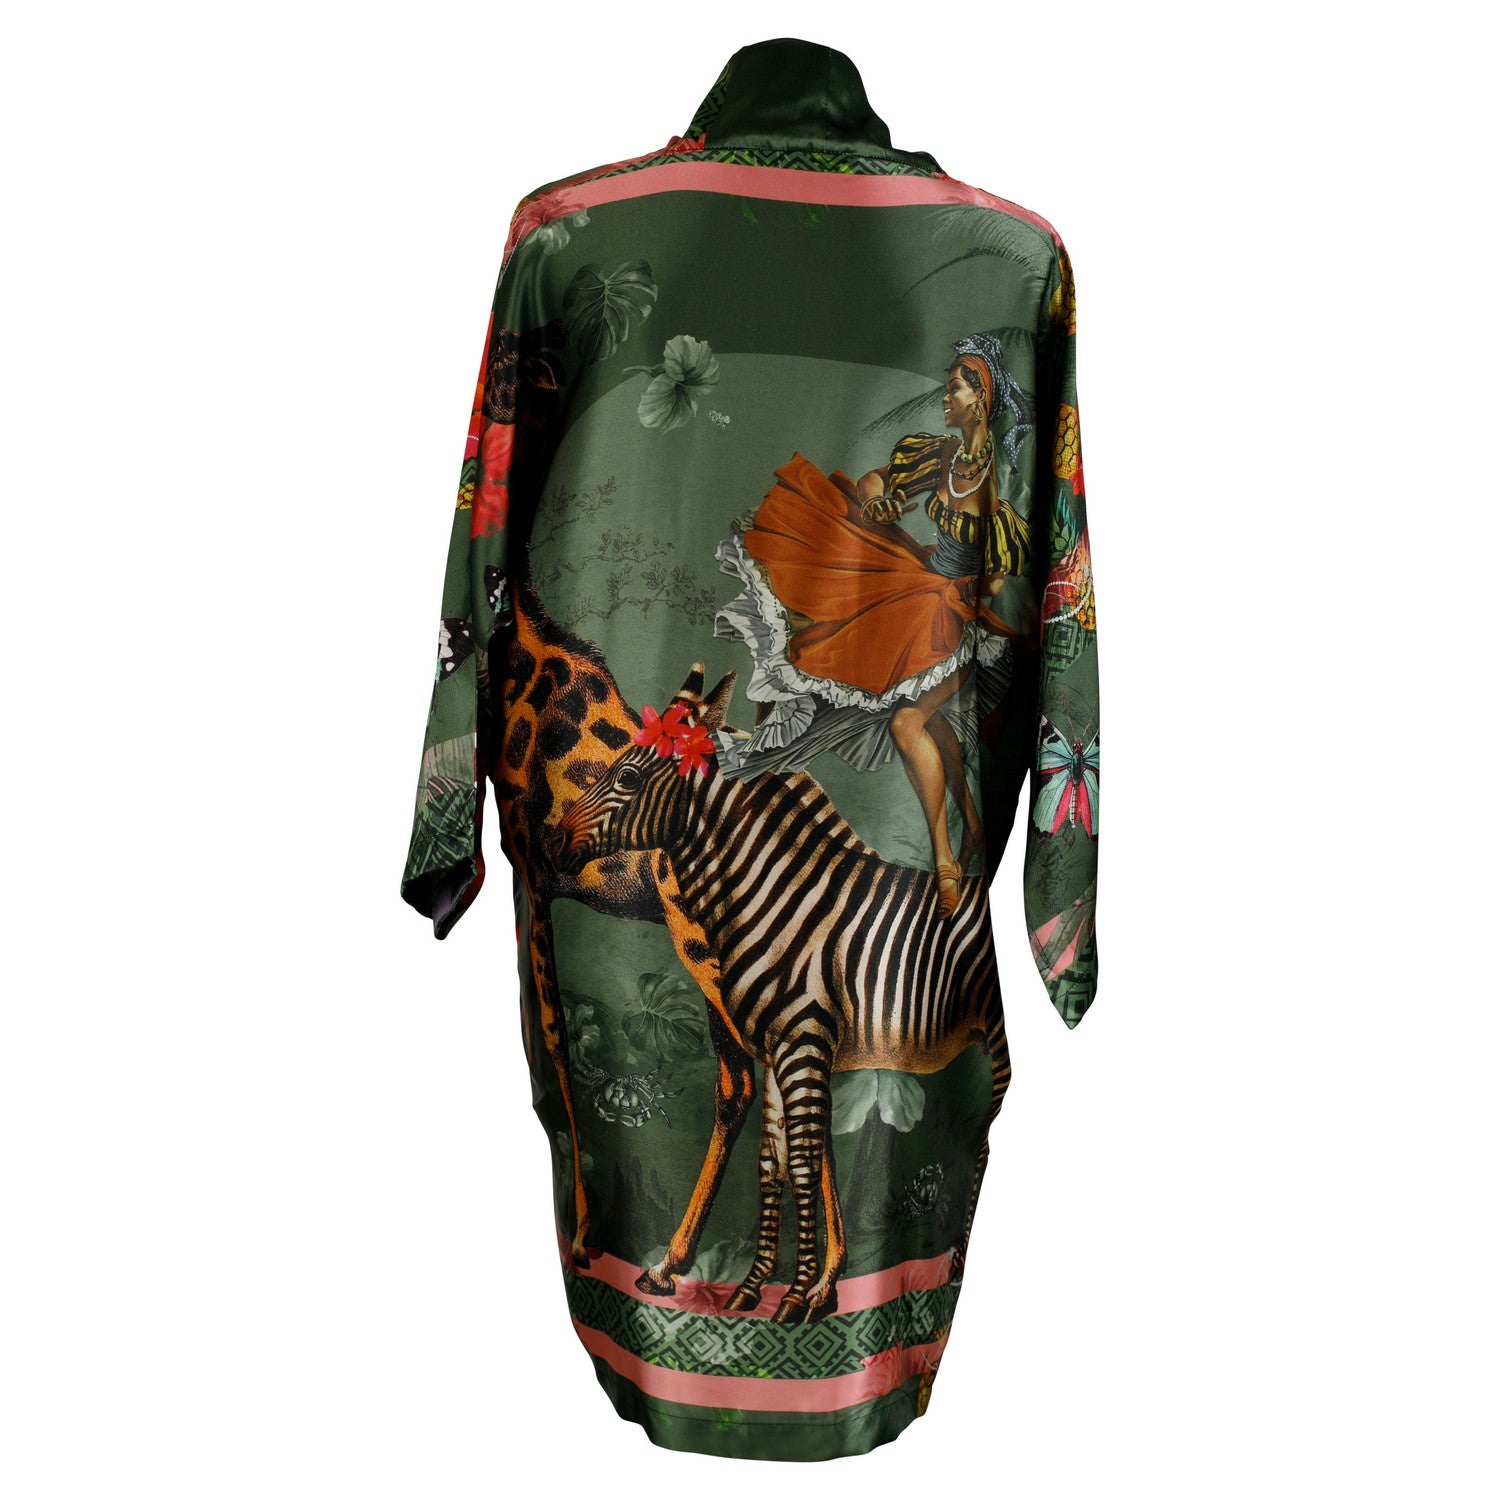 Back view of luxury 100% silk Kimono in a maximalist Carnival inspired design against an olive background 